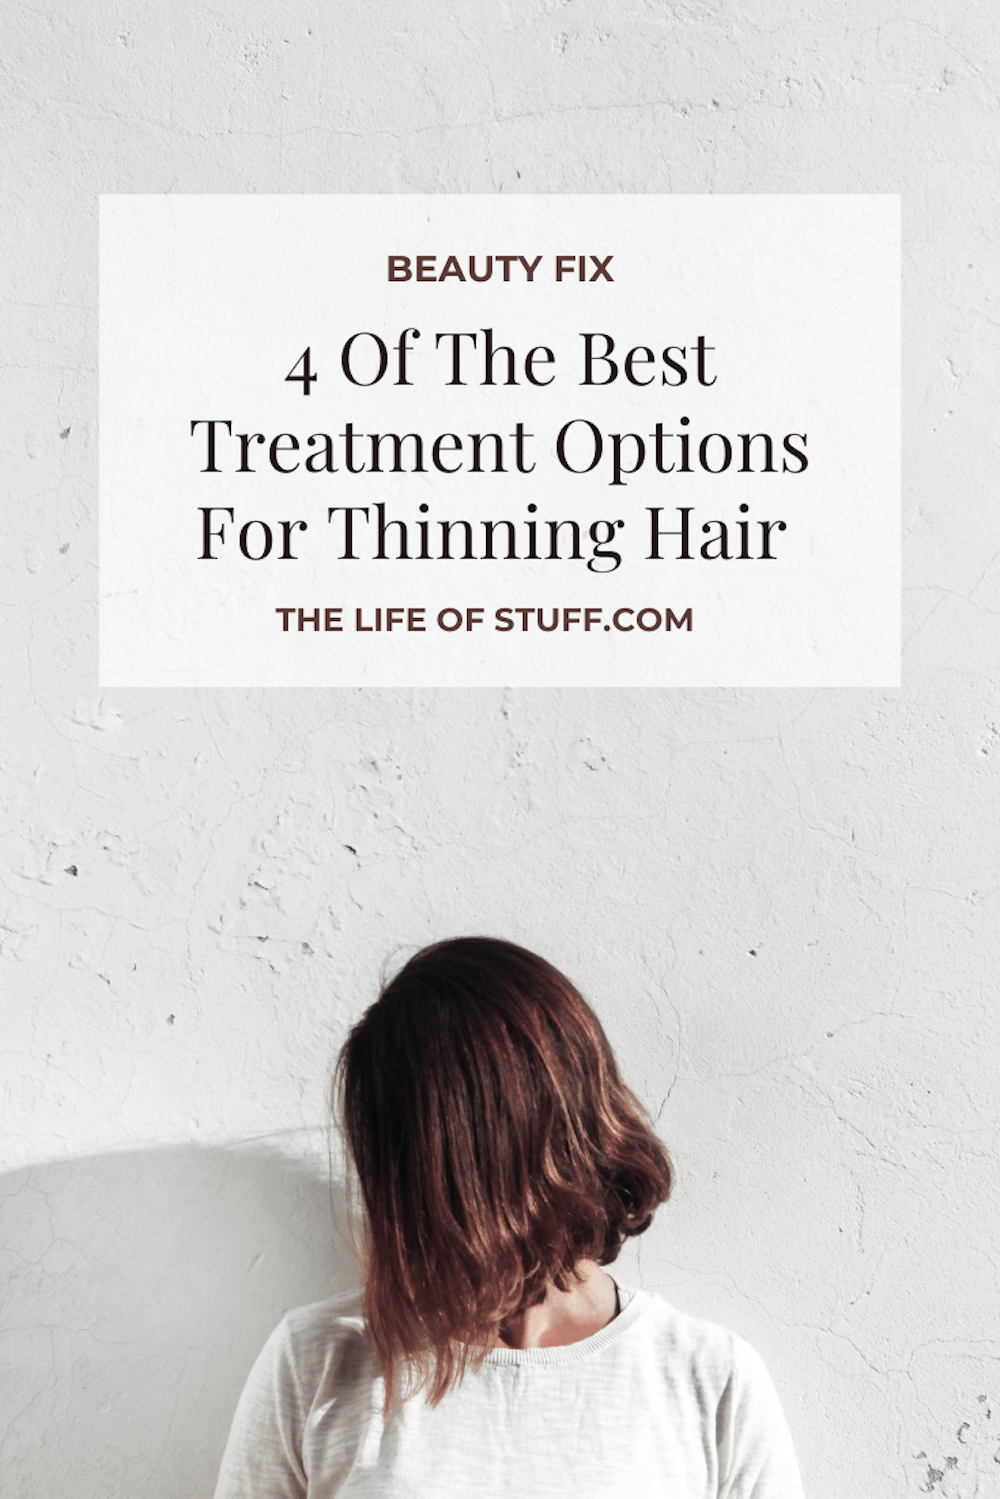 Beauty Fix - The Best Treatment Options For Thinning Hair - The Life of Stuff